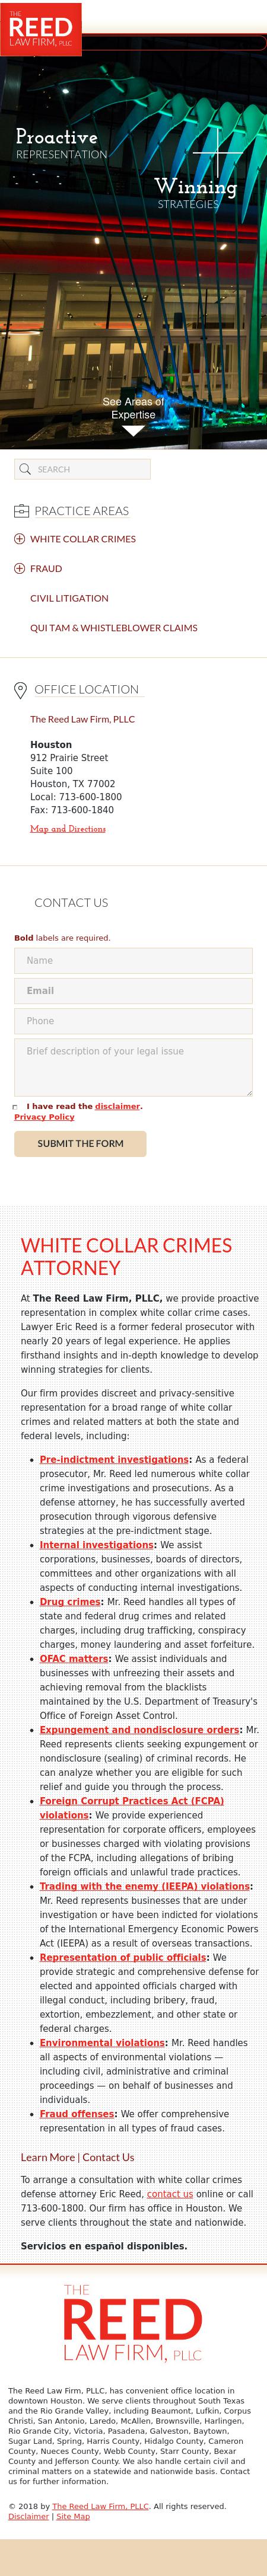 The Reed Law Firm, PLLC - Pharr TX Lawyers